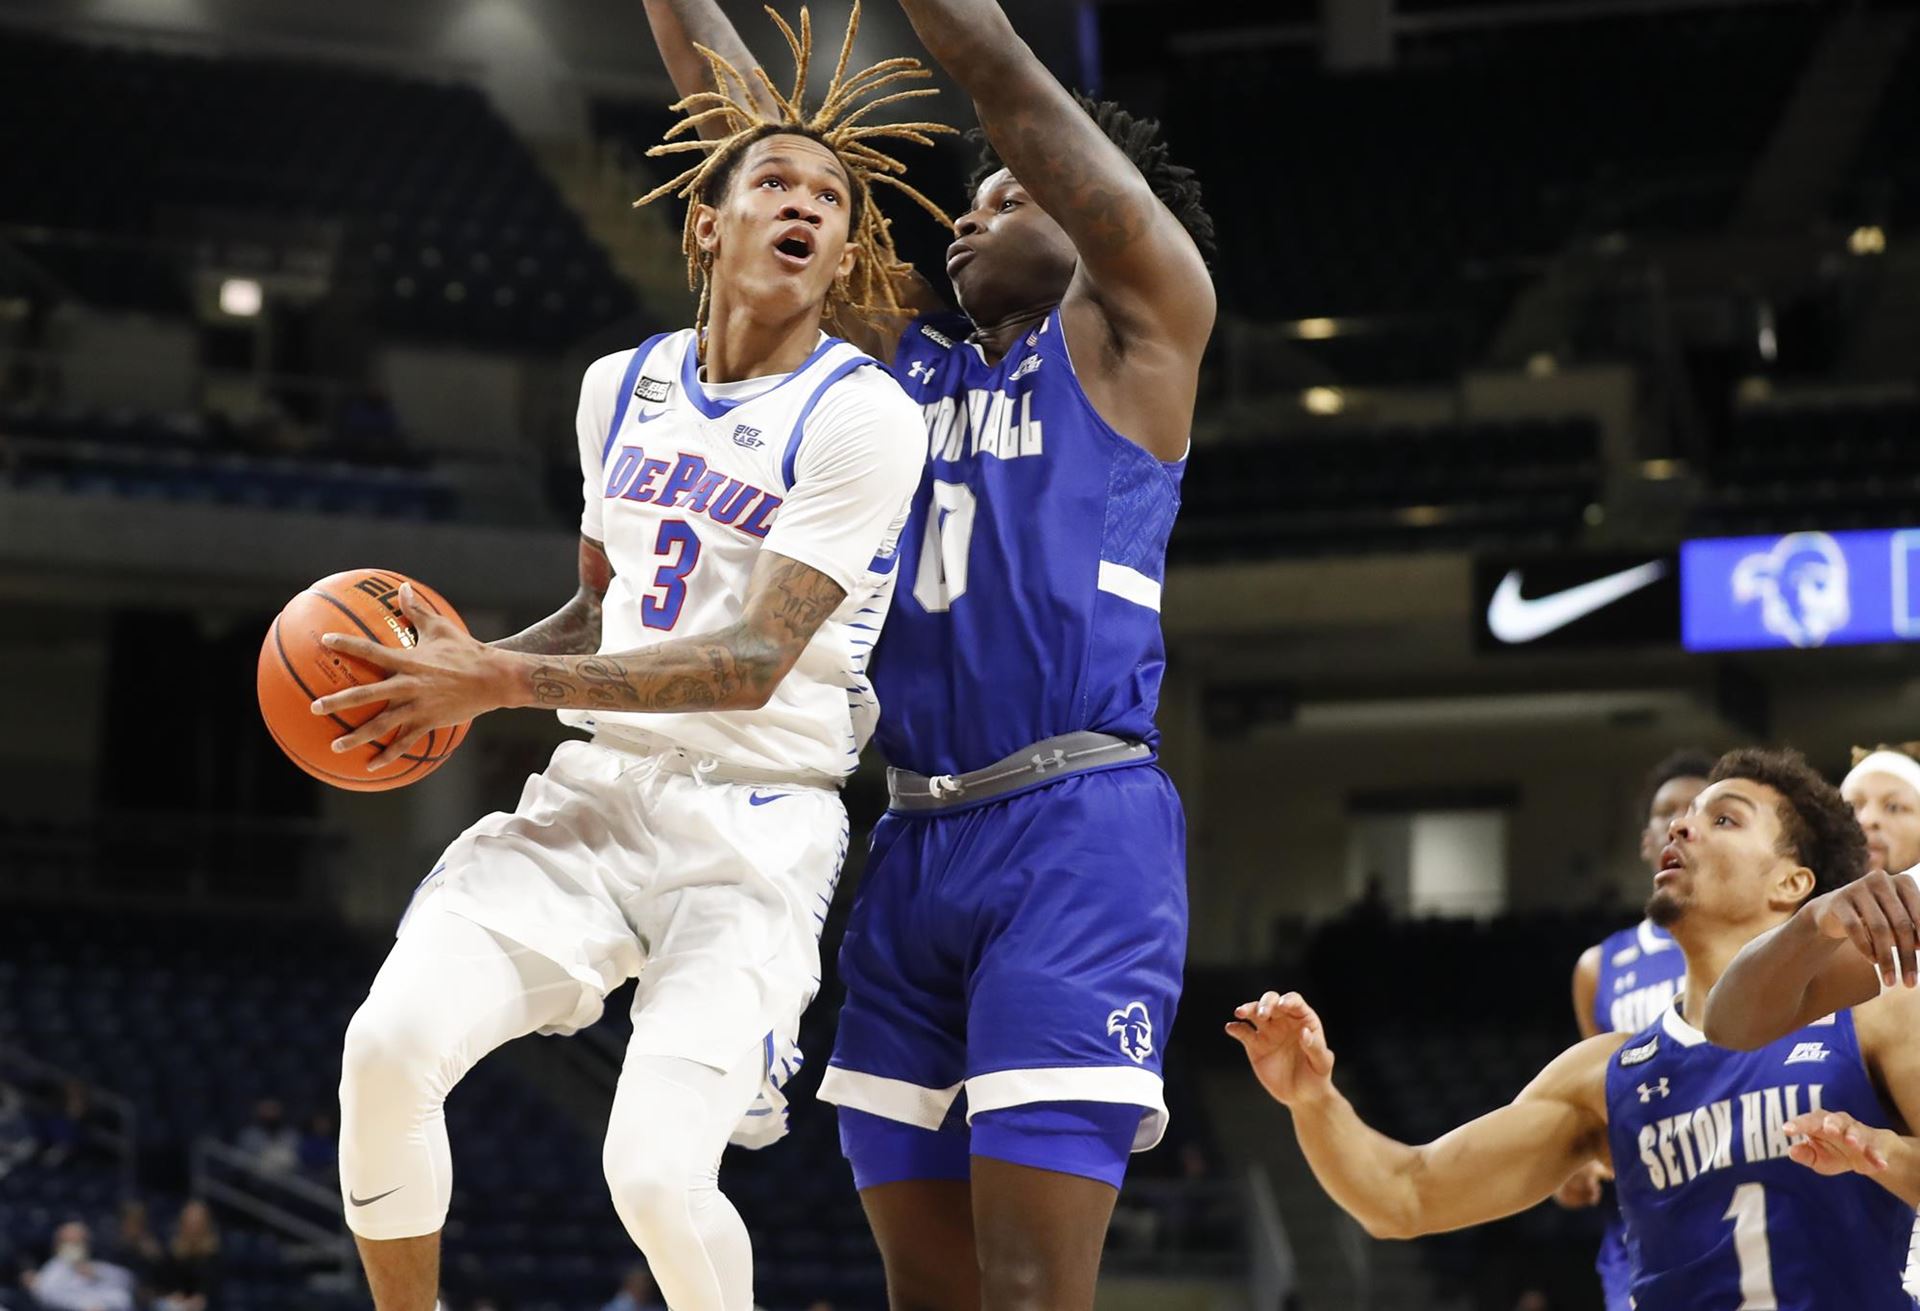 Seton Hall men's basketball takes on DePaul in a road contest during the Big East conference schedule.